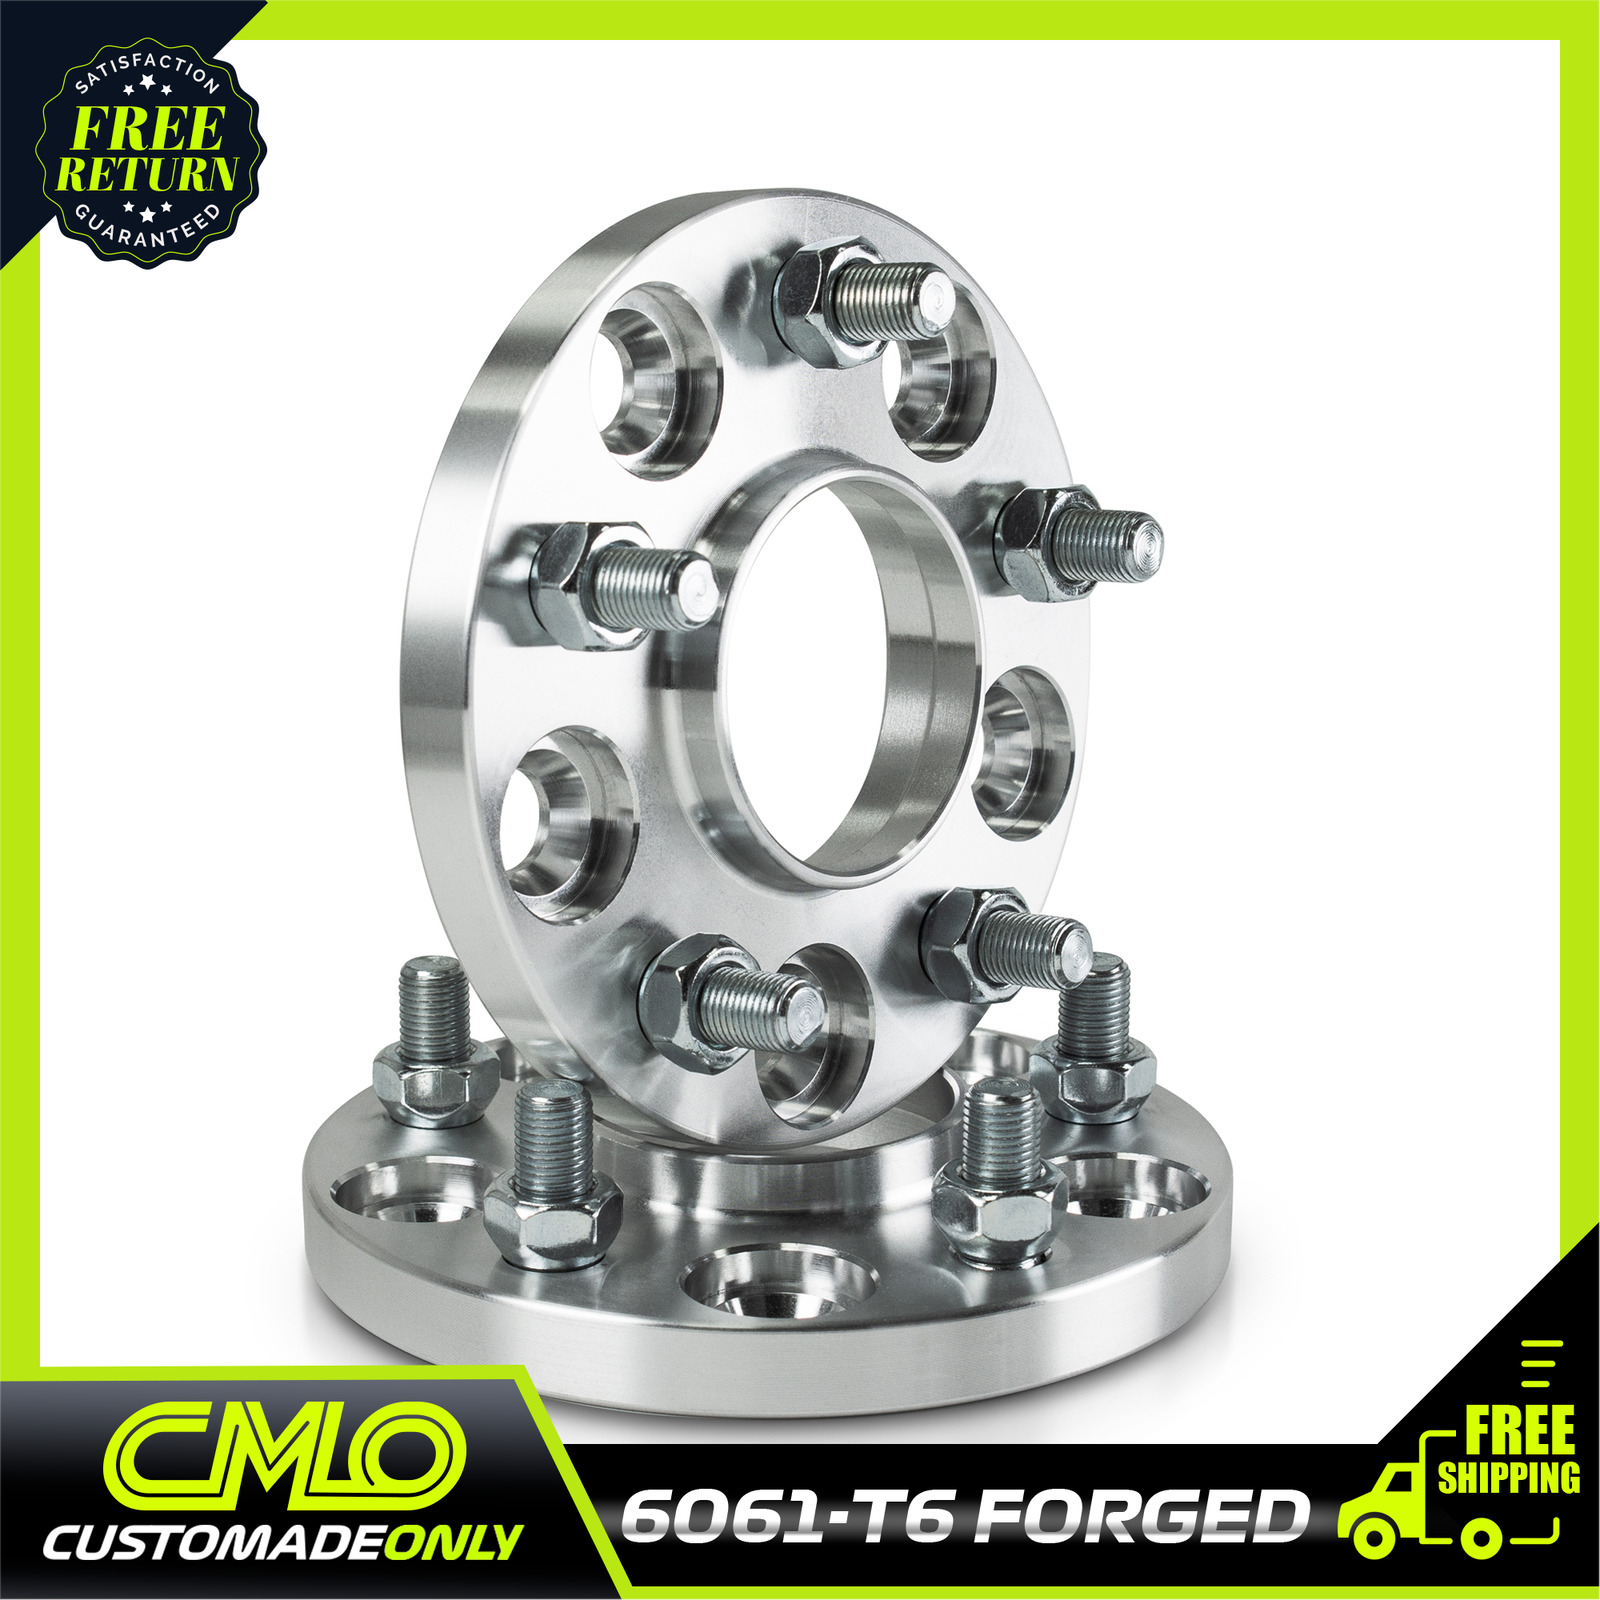 2pc Hub Centric Wheel Spacers 5x100 to 5x100 54.1mm Bore 12x1.5 Lugs 15mm Thick